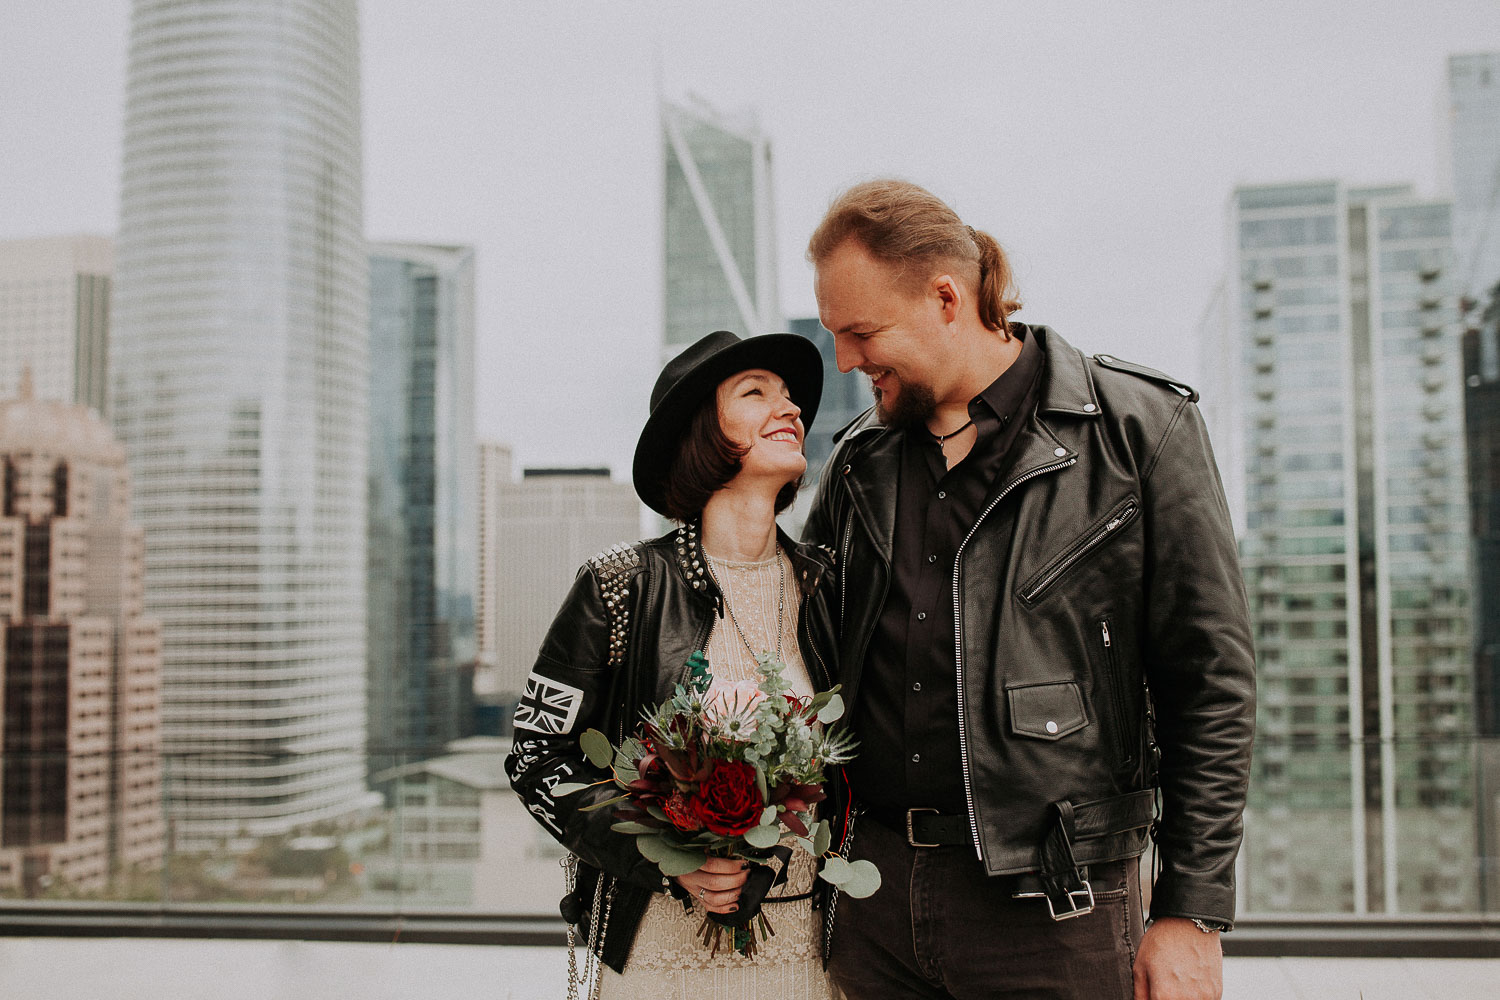 Rock'n'Roll elopement in San Francisco Downtown. Hard Rock bikers wedding. Leather jackets and biker boots